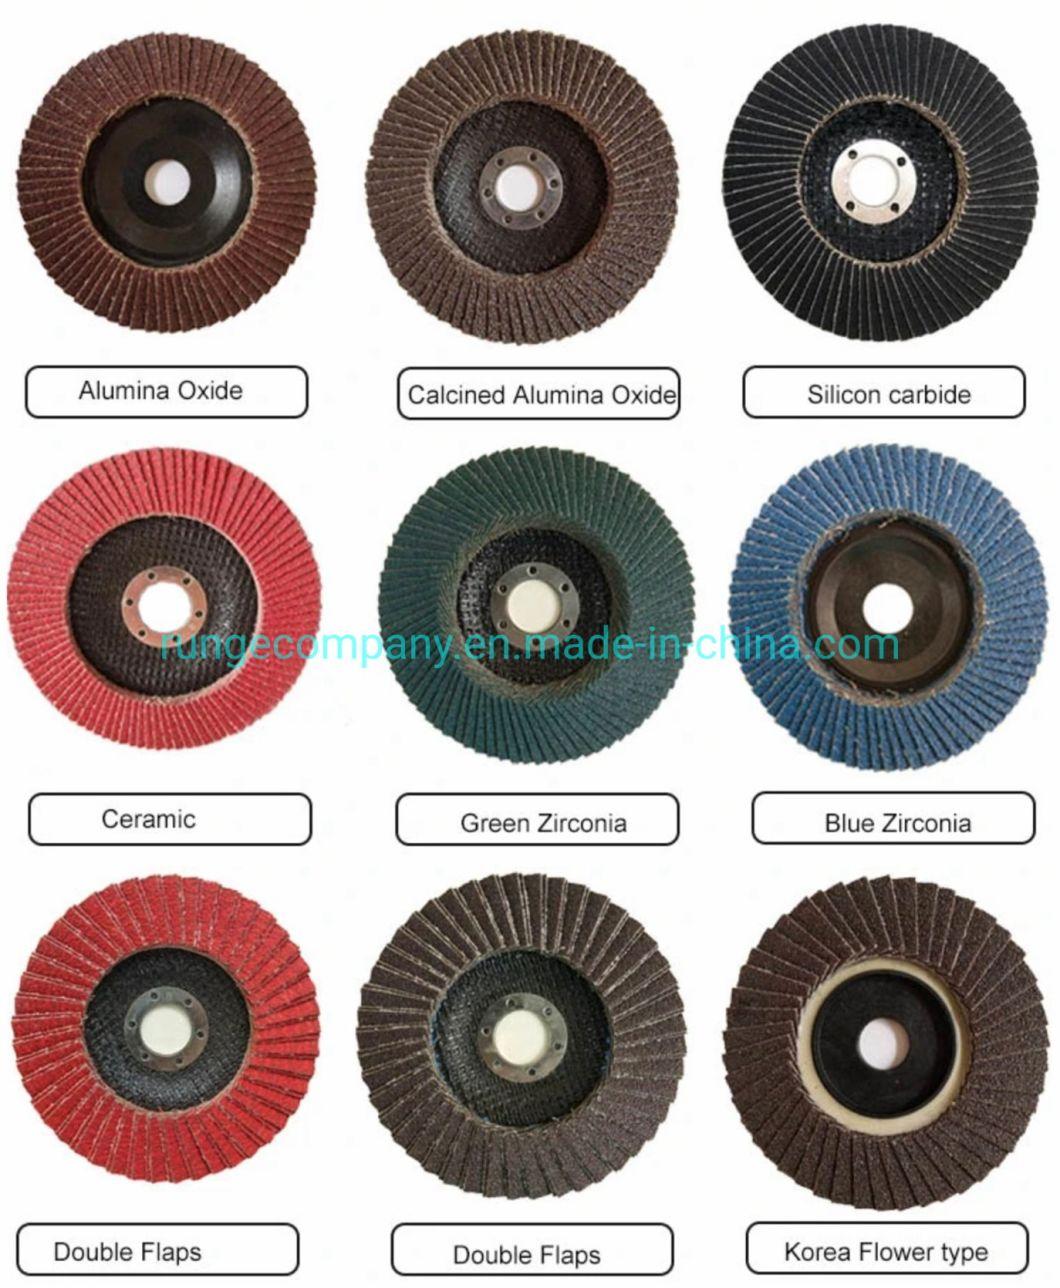 Industries Power Electric Tools Accessories Saw Cut-off Wheels for Ferrous Metals, 14" X 1/8" (5/32) X 1"